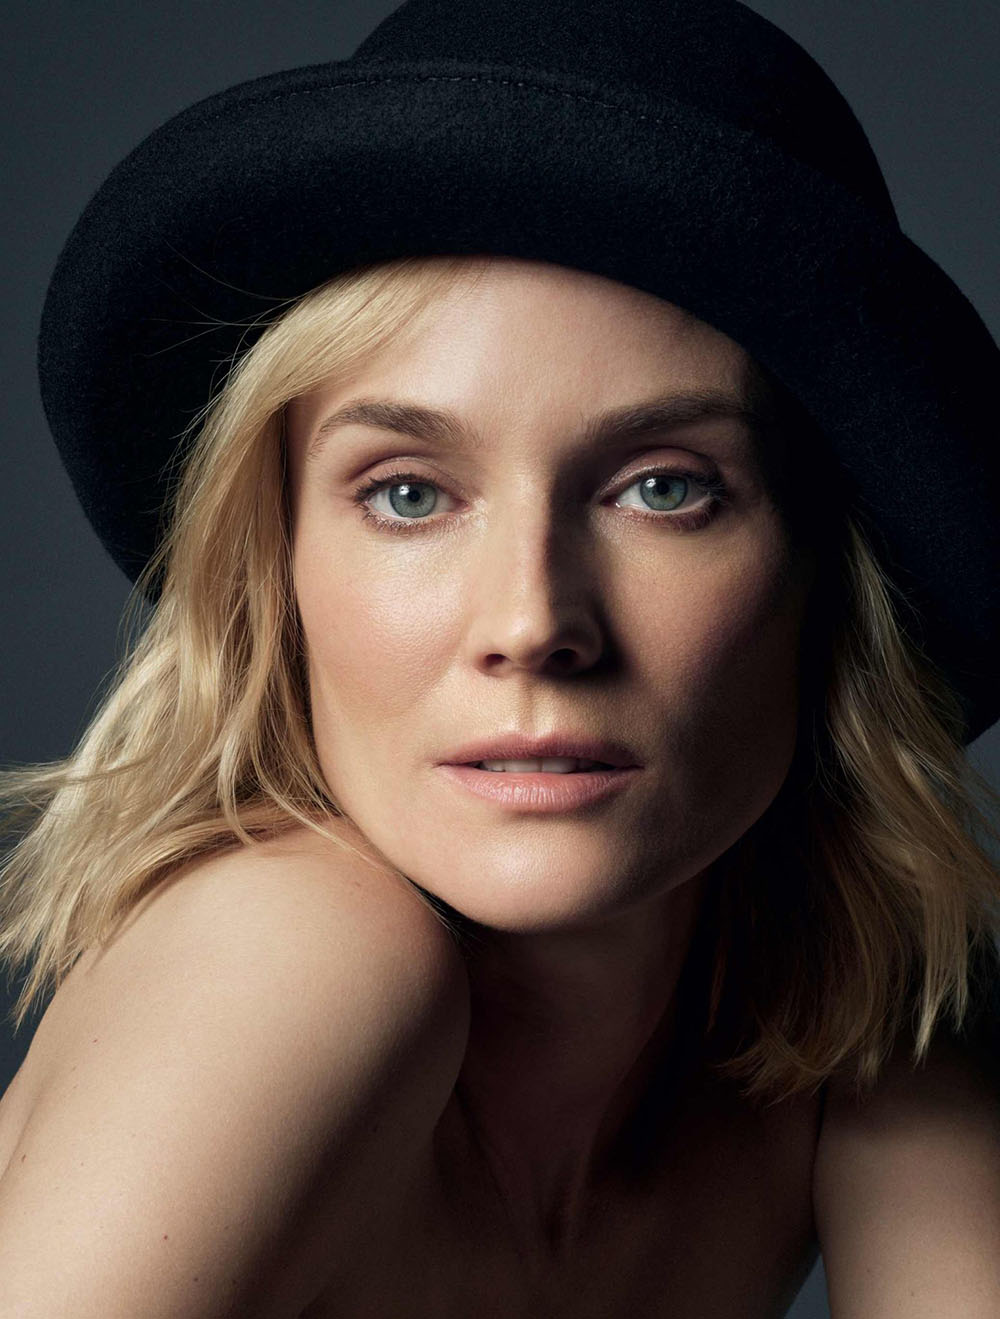 Diane Kruger covers Vogue Greece January February 2021 by Mark Seliger